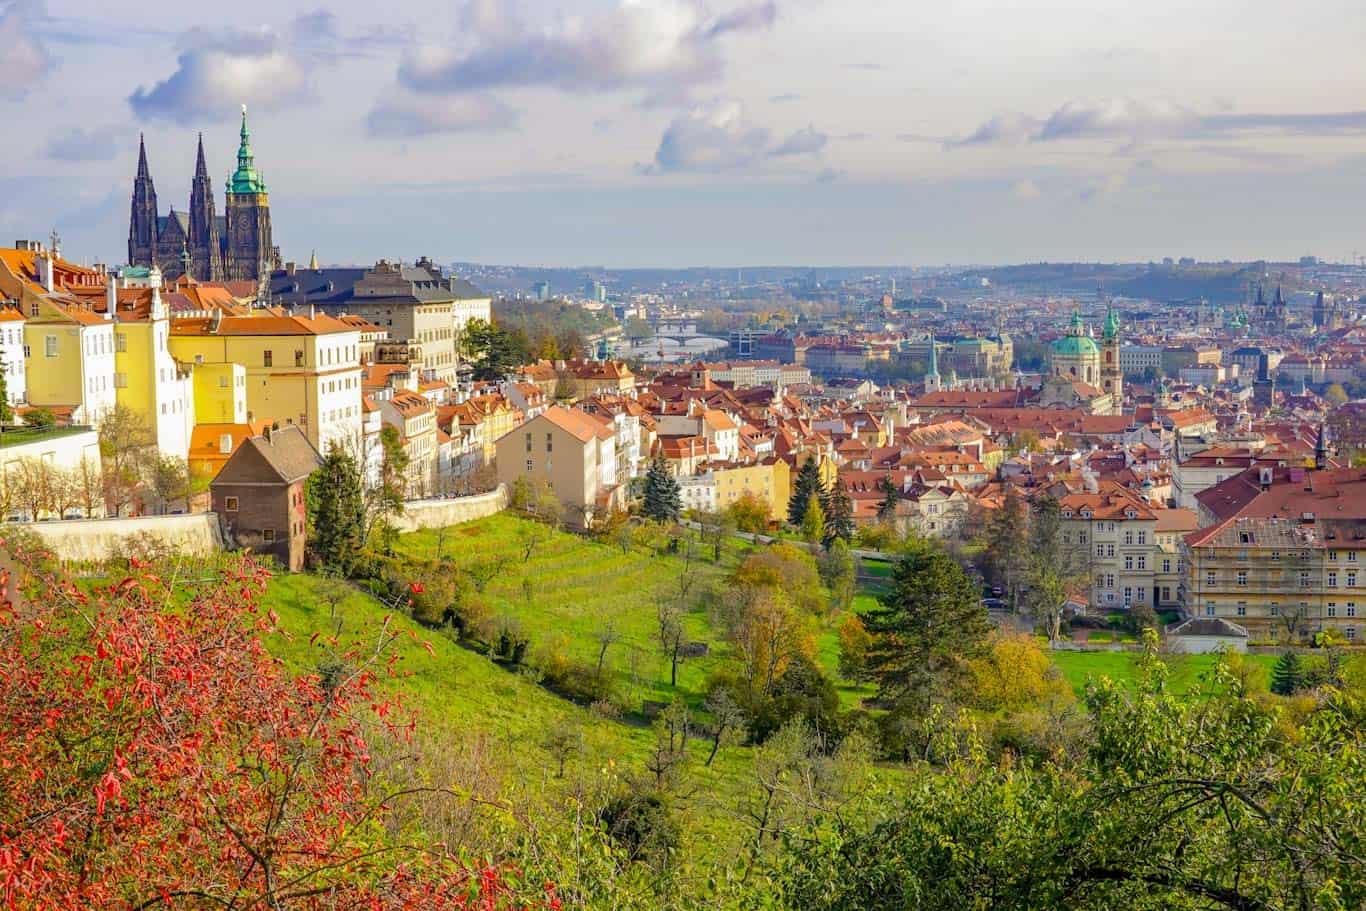 View of Prague Castle to Old Town Square in Prague from behind Strahov Monastery on Petrin Hill